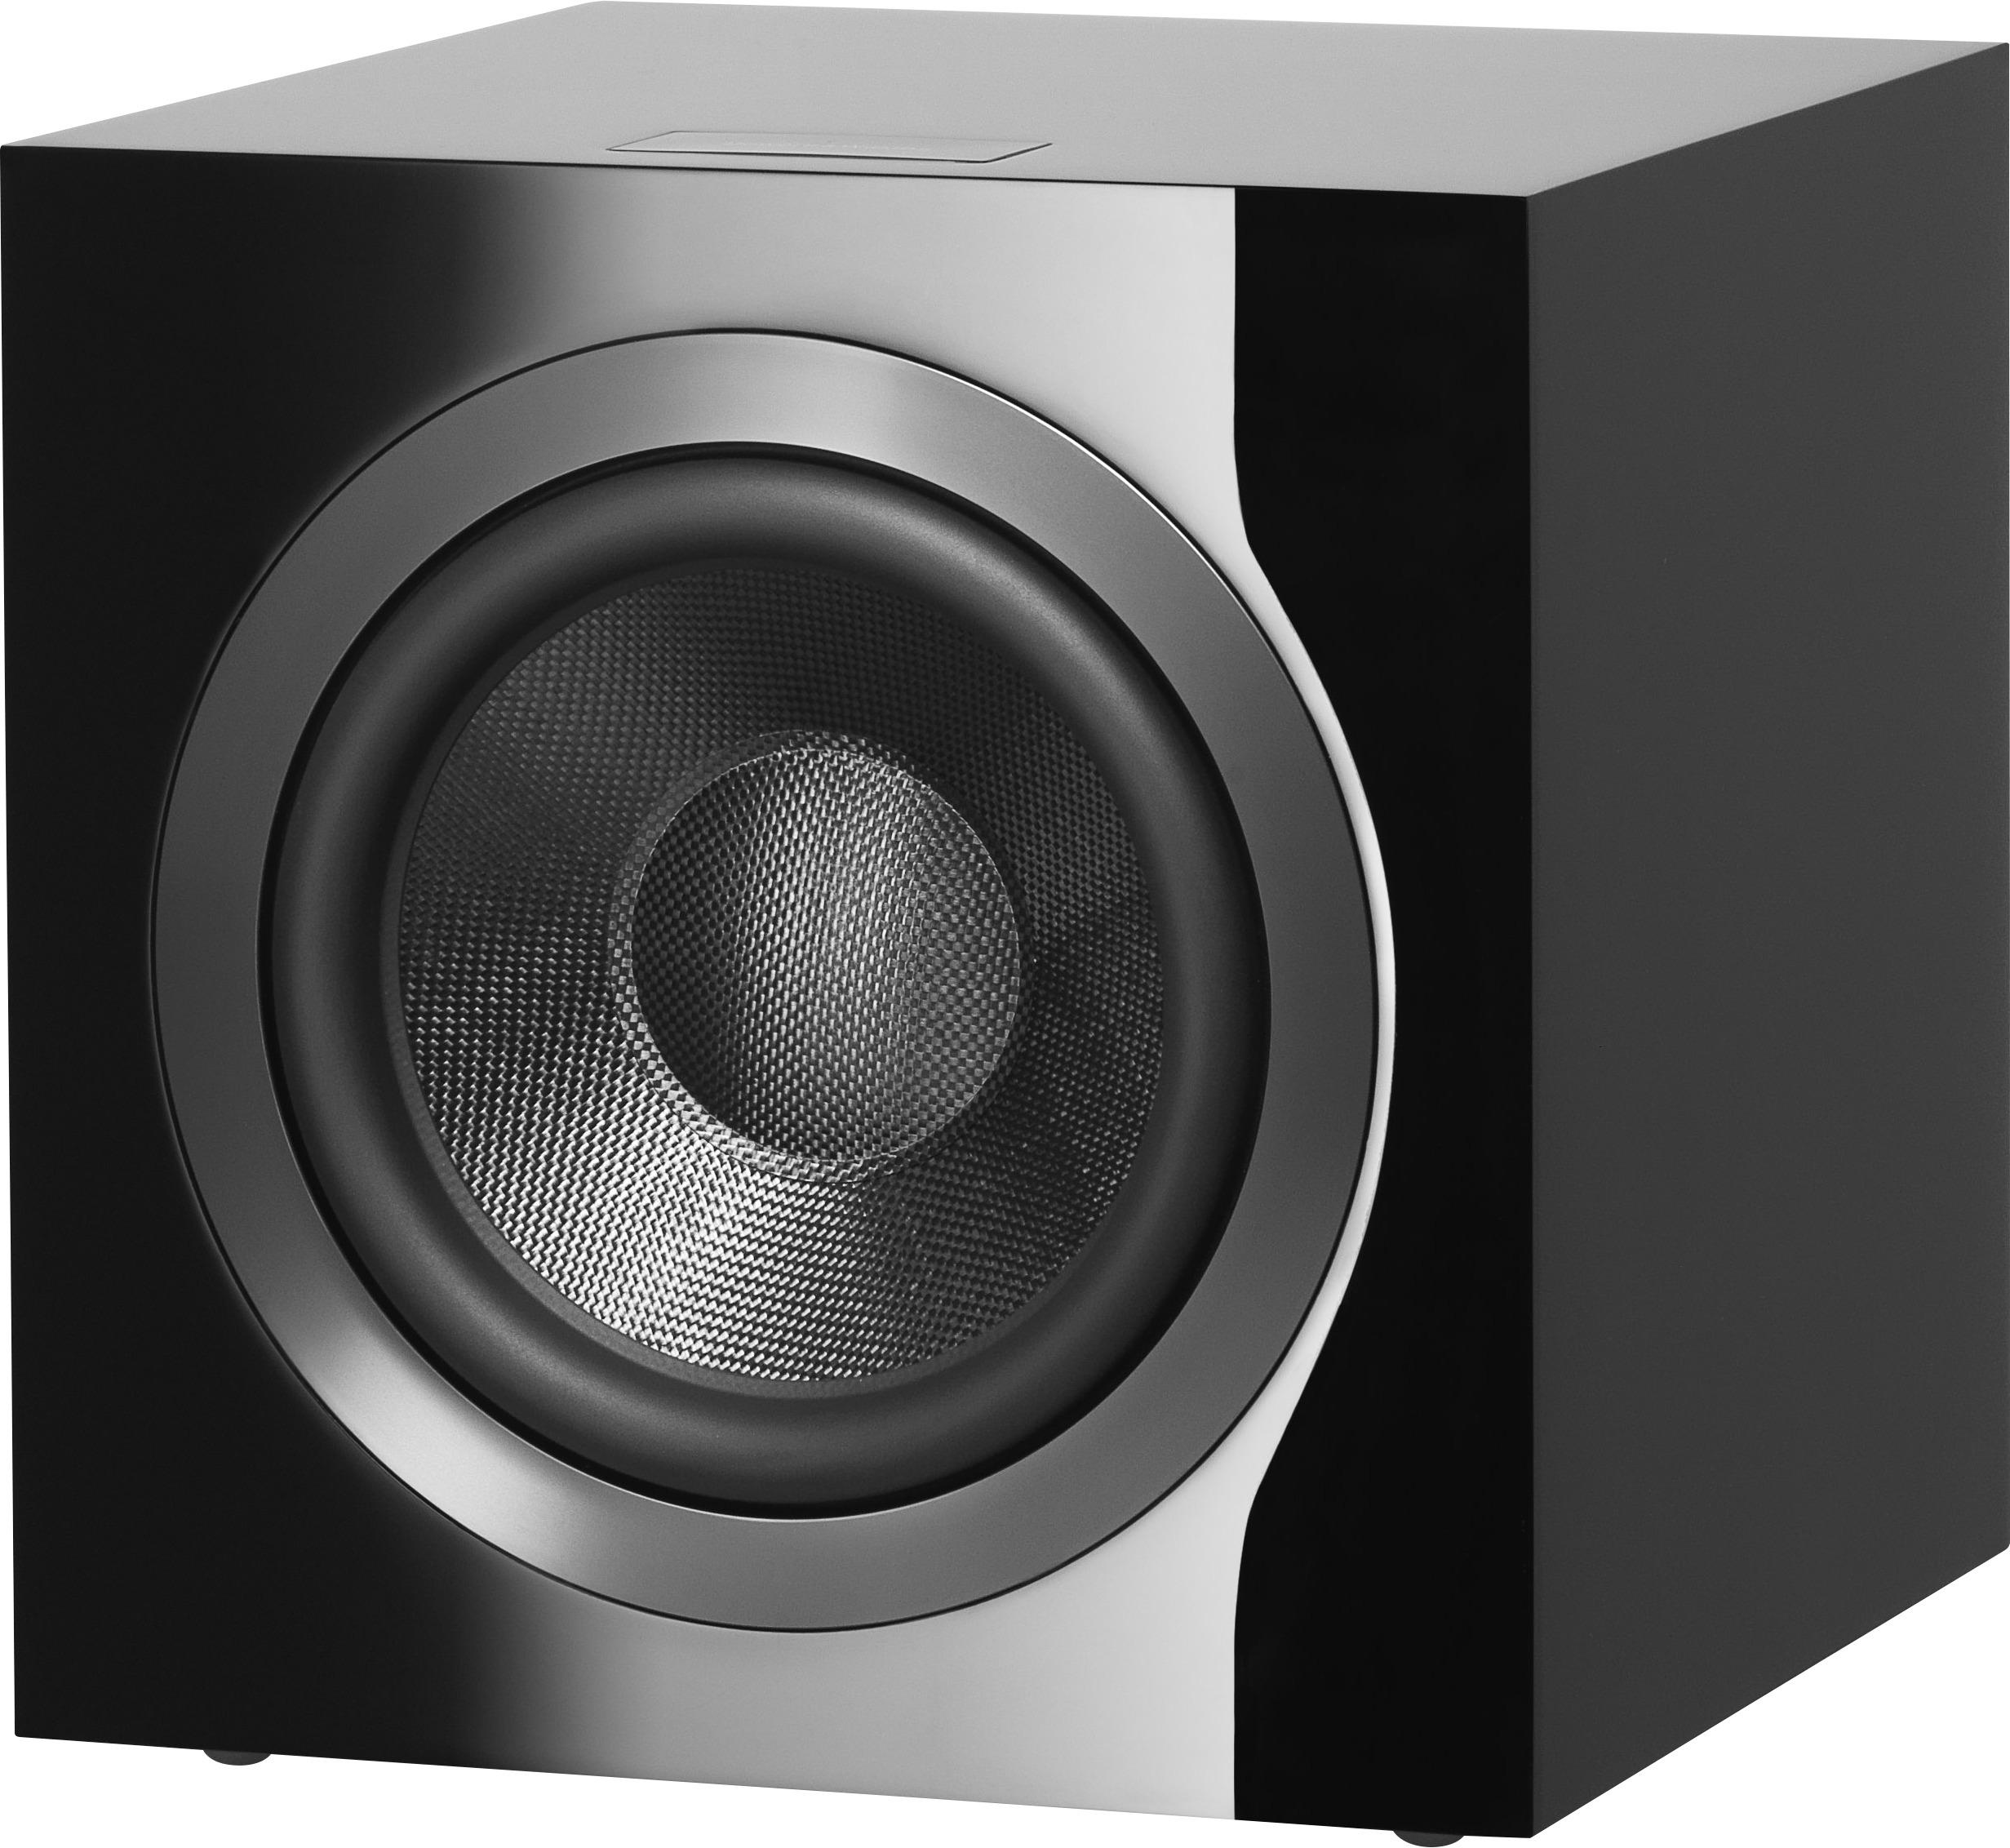 Angle View: Bowers & Wilkins - 700 Series 10" 1000W Powered Subwoofer - Rosenut